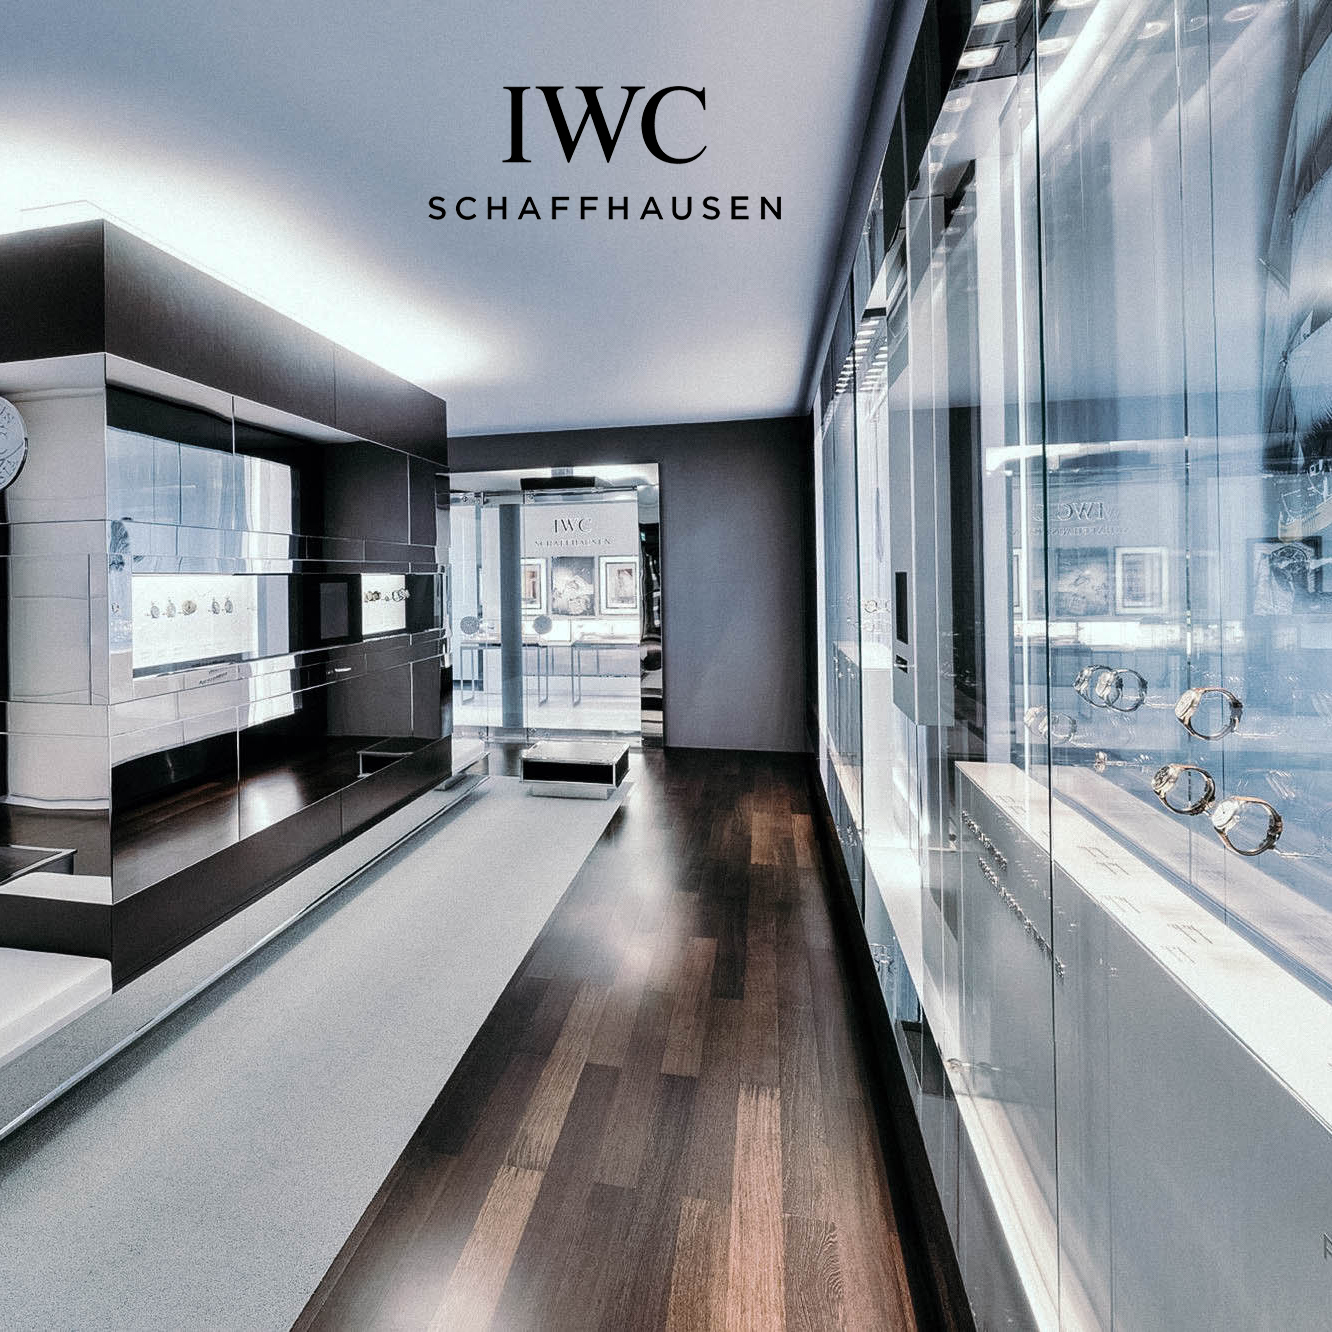 A Visit To The IWC Schaffhausen Manufacture - TheNeverEndingCuriosity